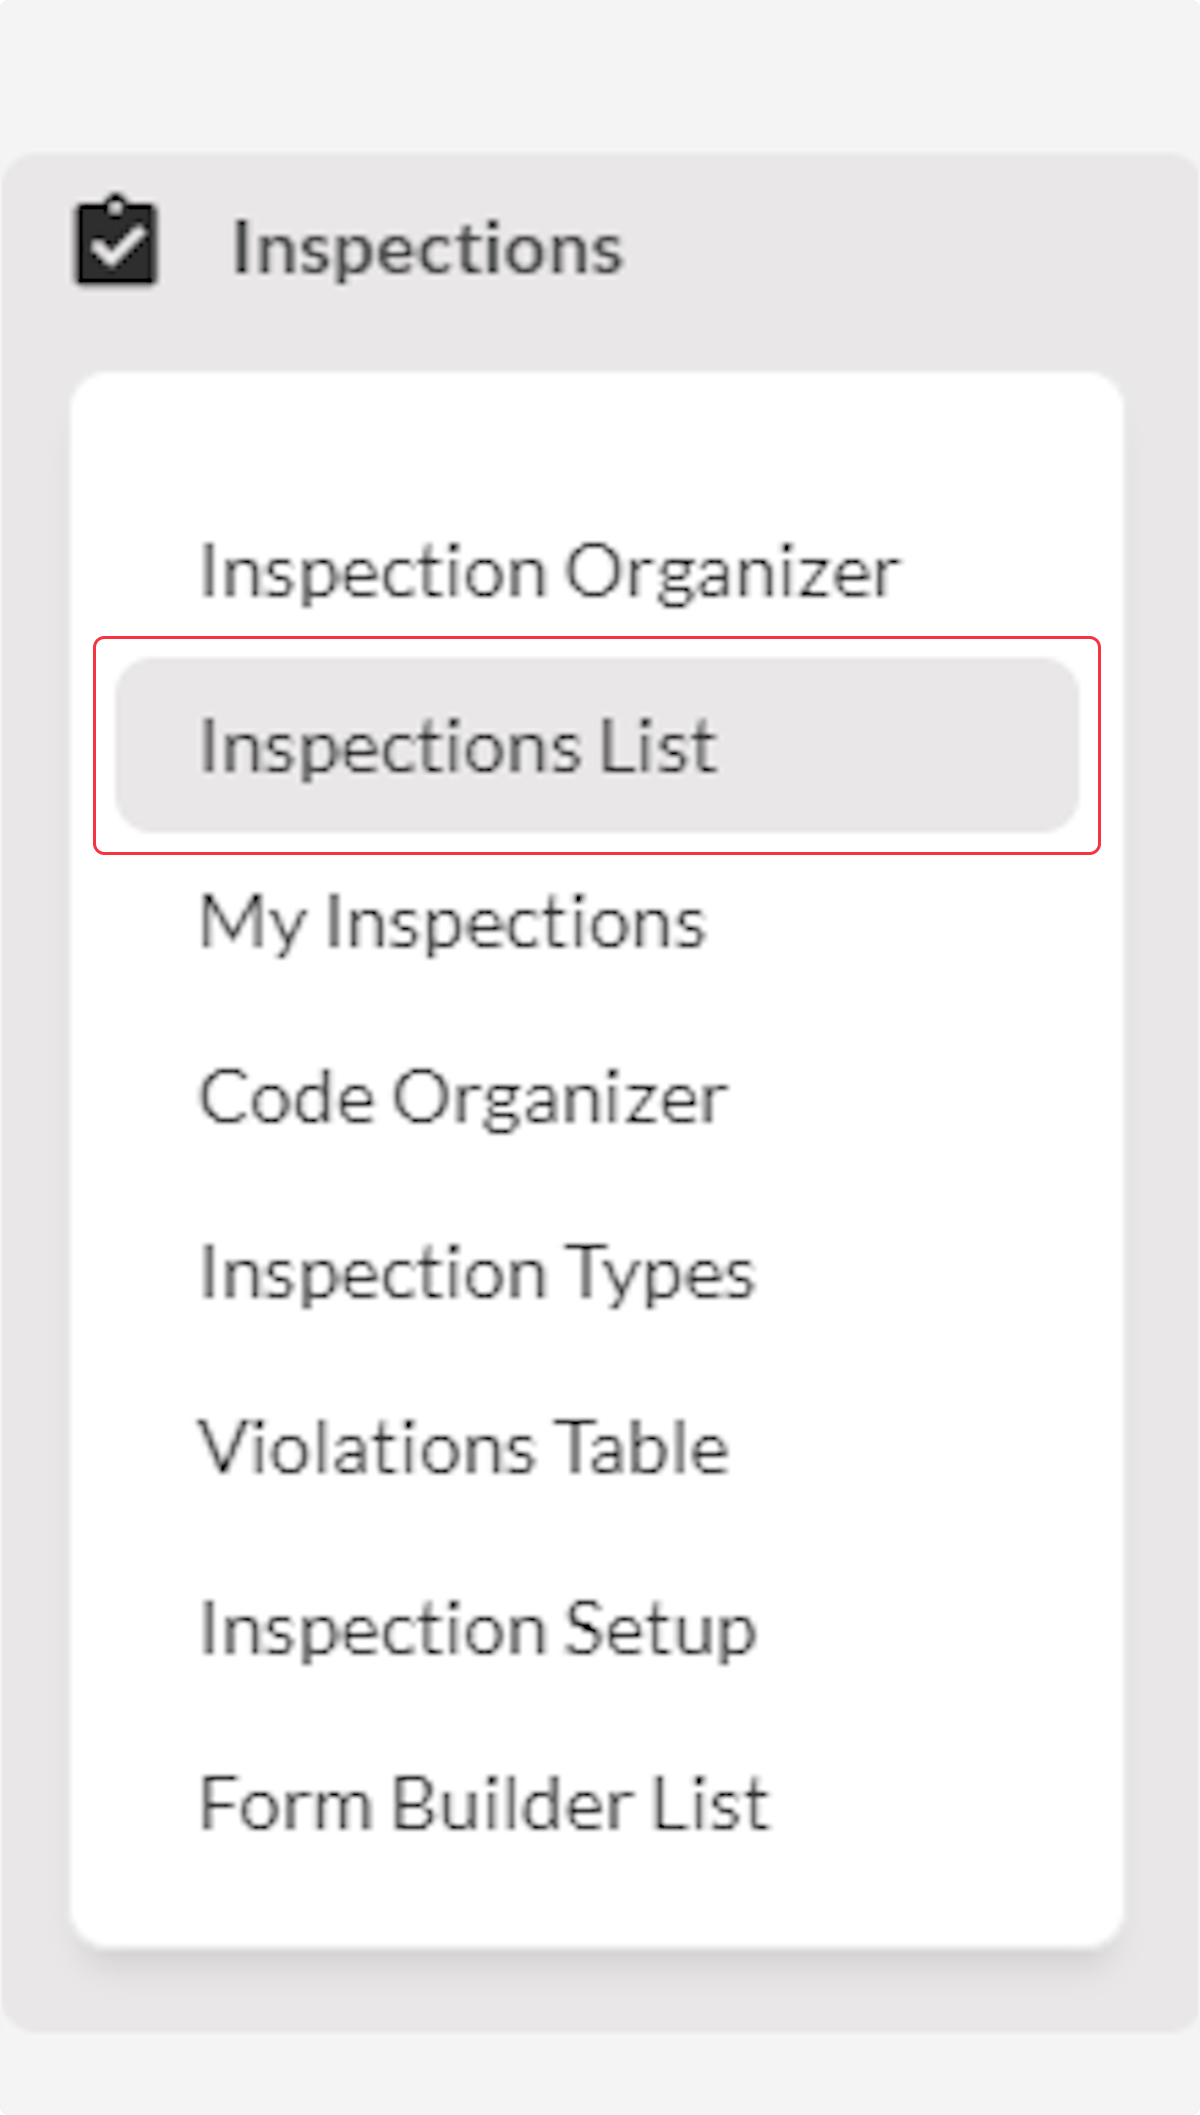 Then select Inspections List.